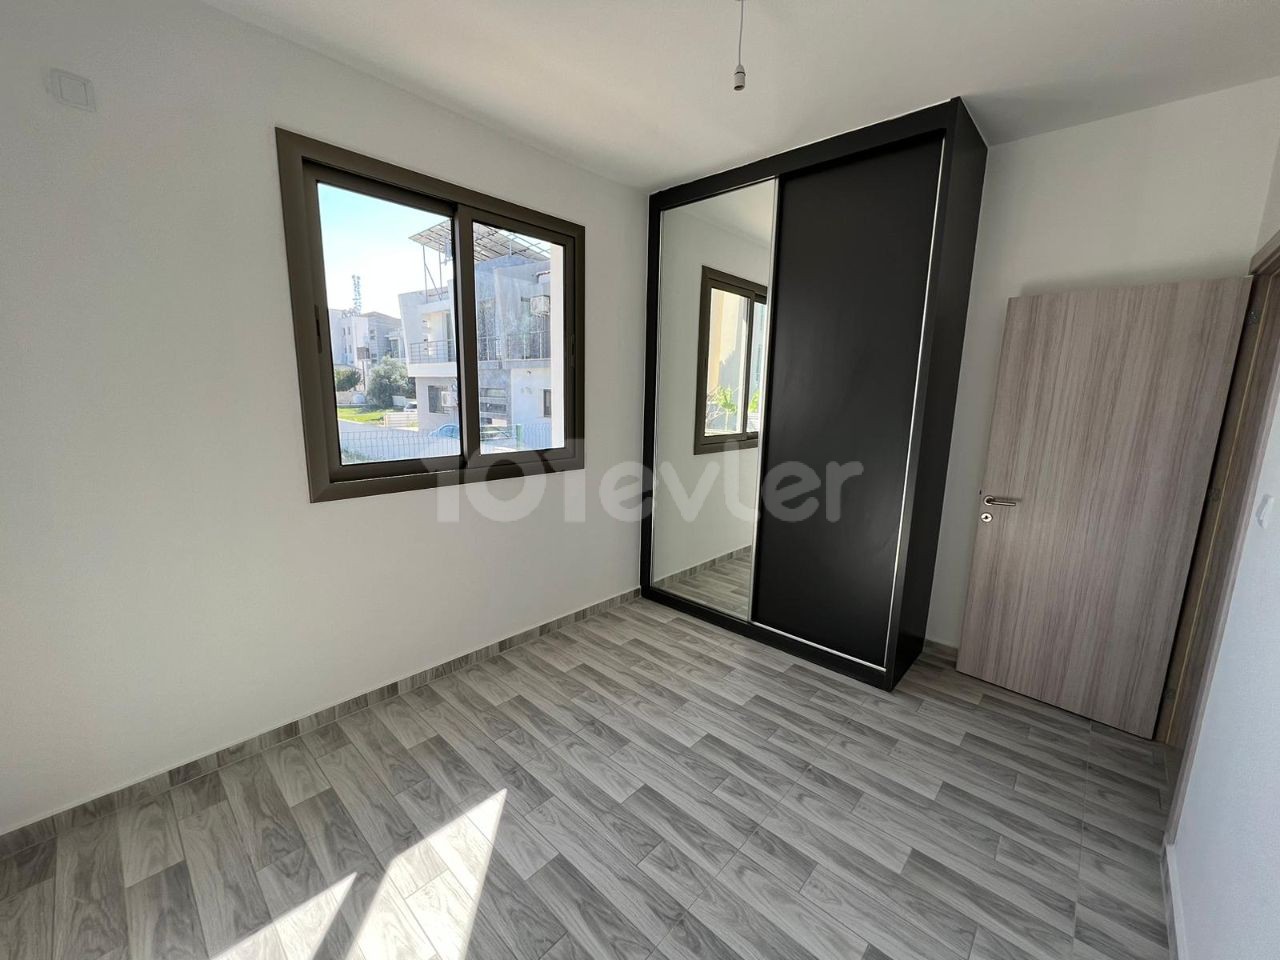 2+1 apartments for sale in Metehan with prices starting from 70,000 stg